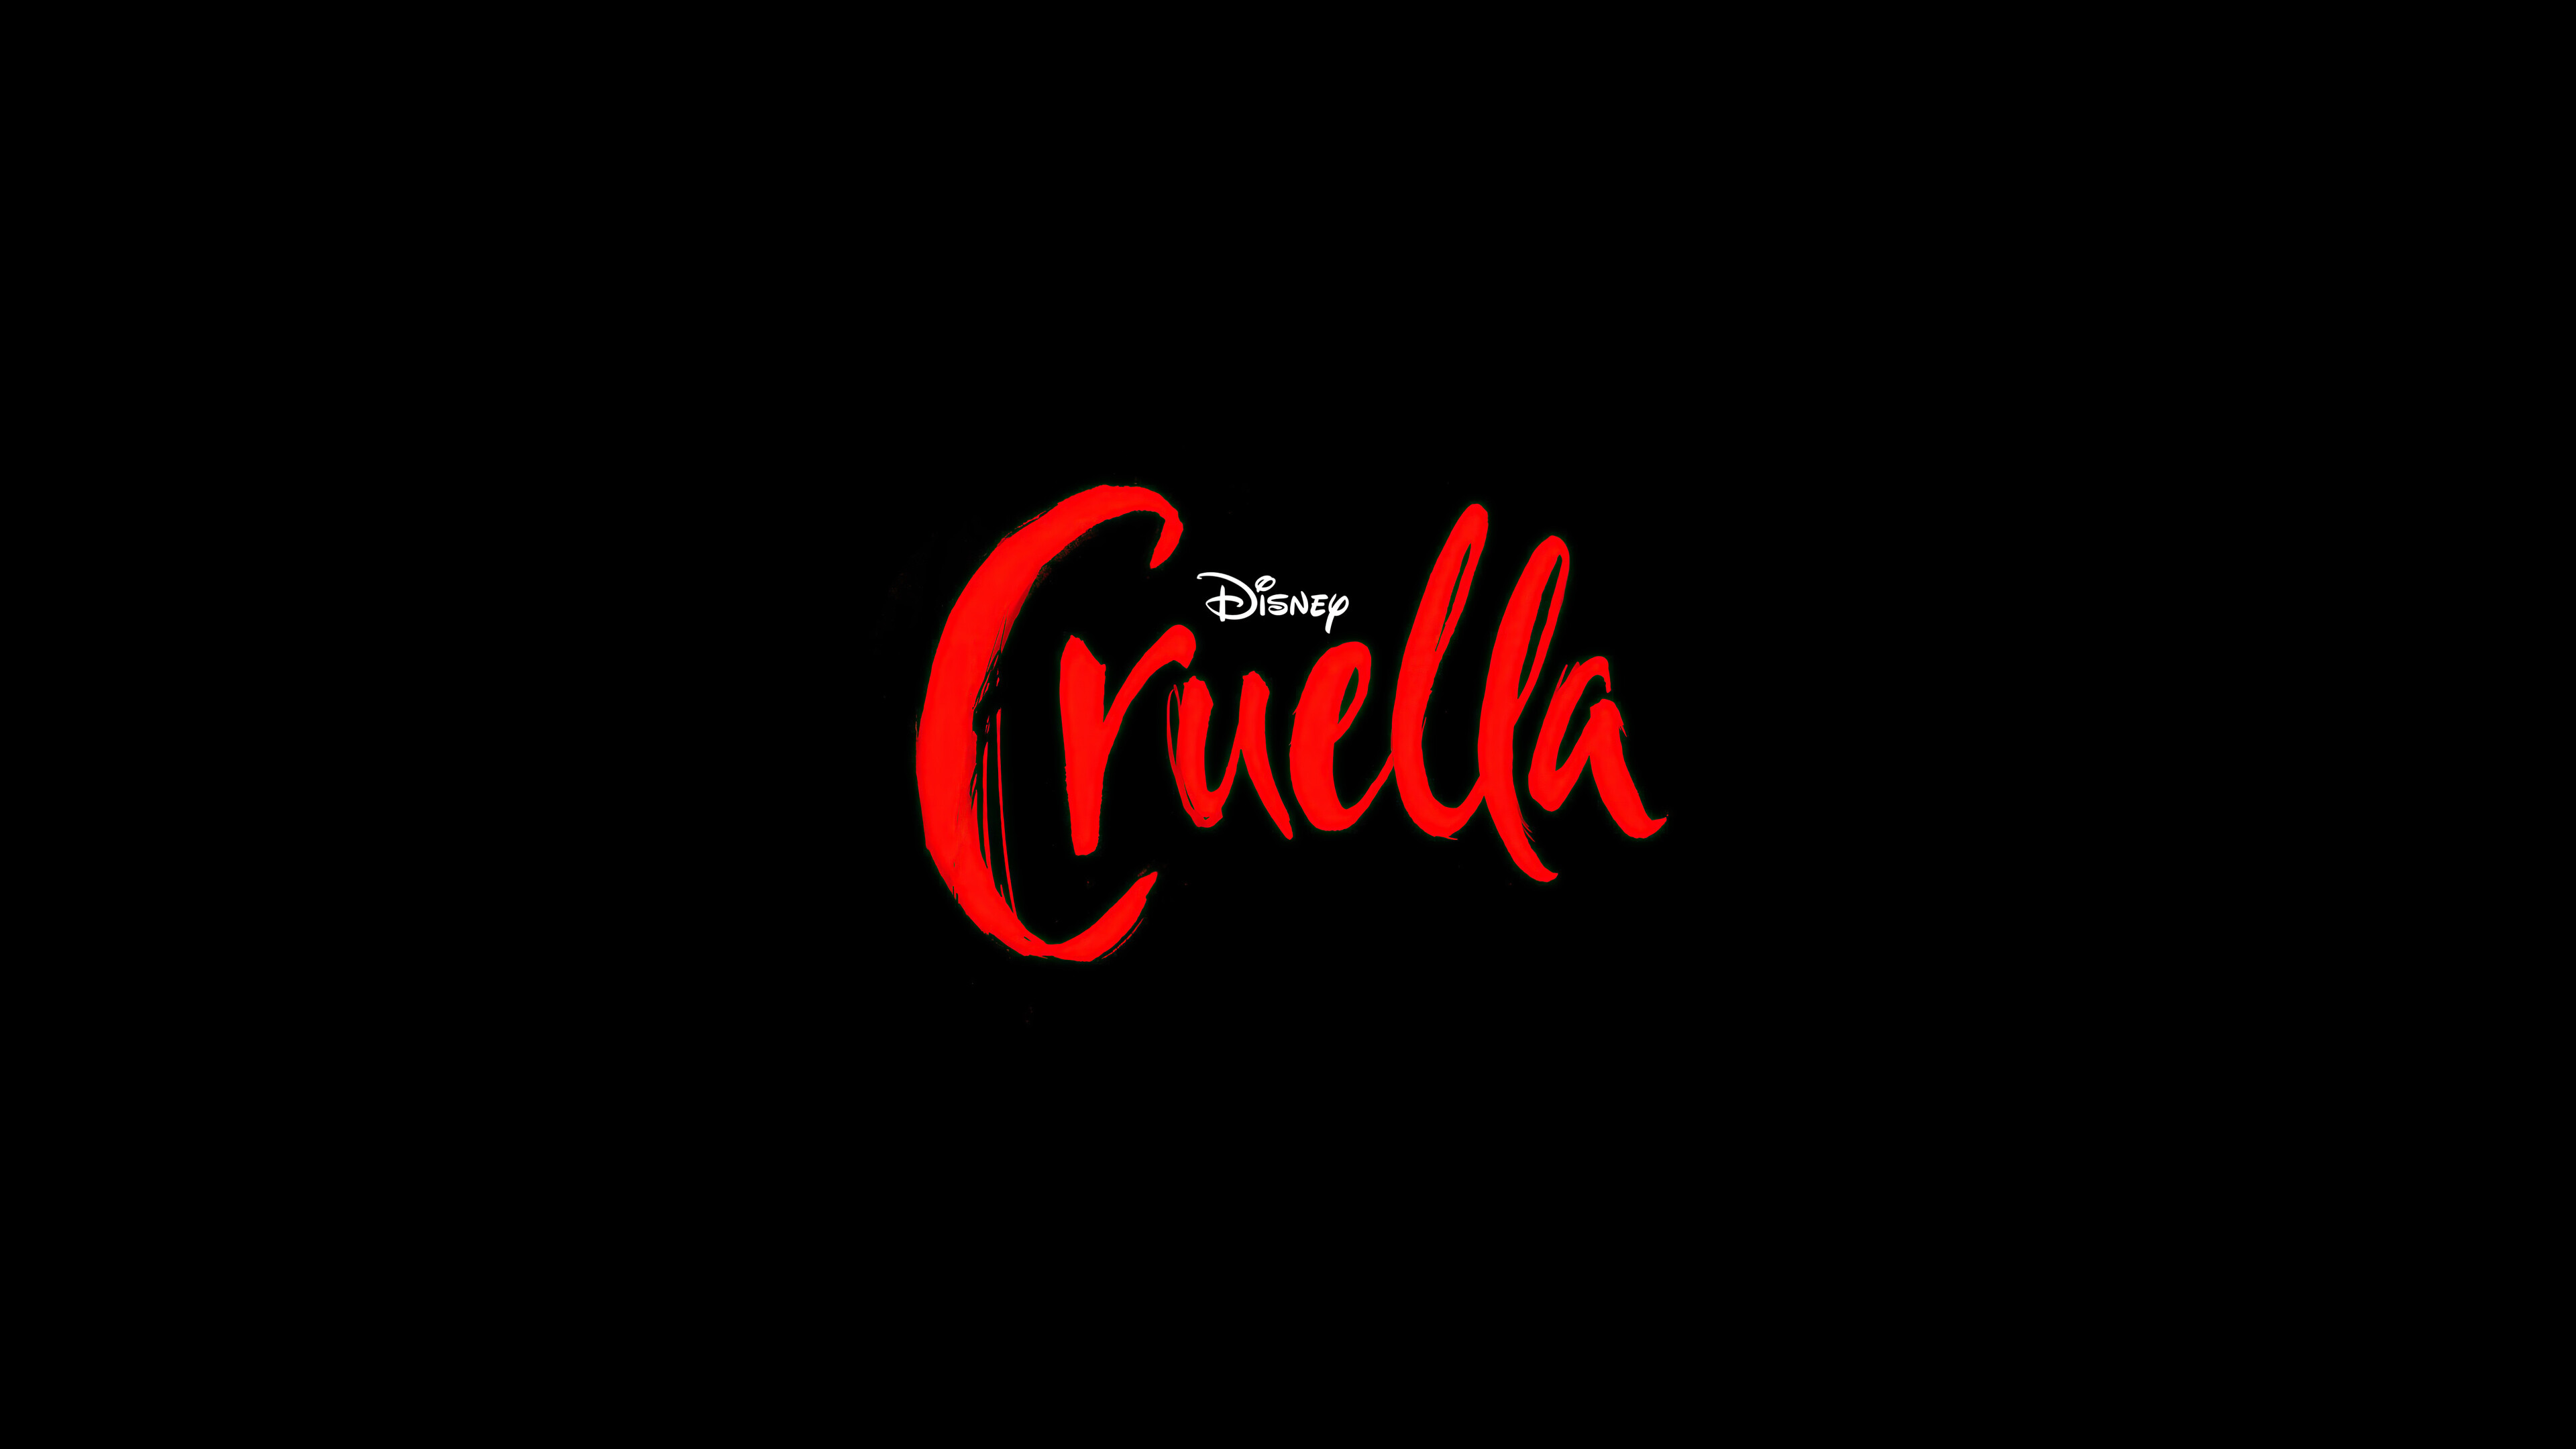 Cruella (2021): In 2013, Walt Disney Pictures announced the film's development with Andrew Gunn as a producer, Poster. 3840x2160 4K Wallpaper.